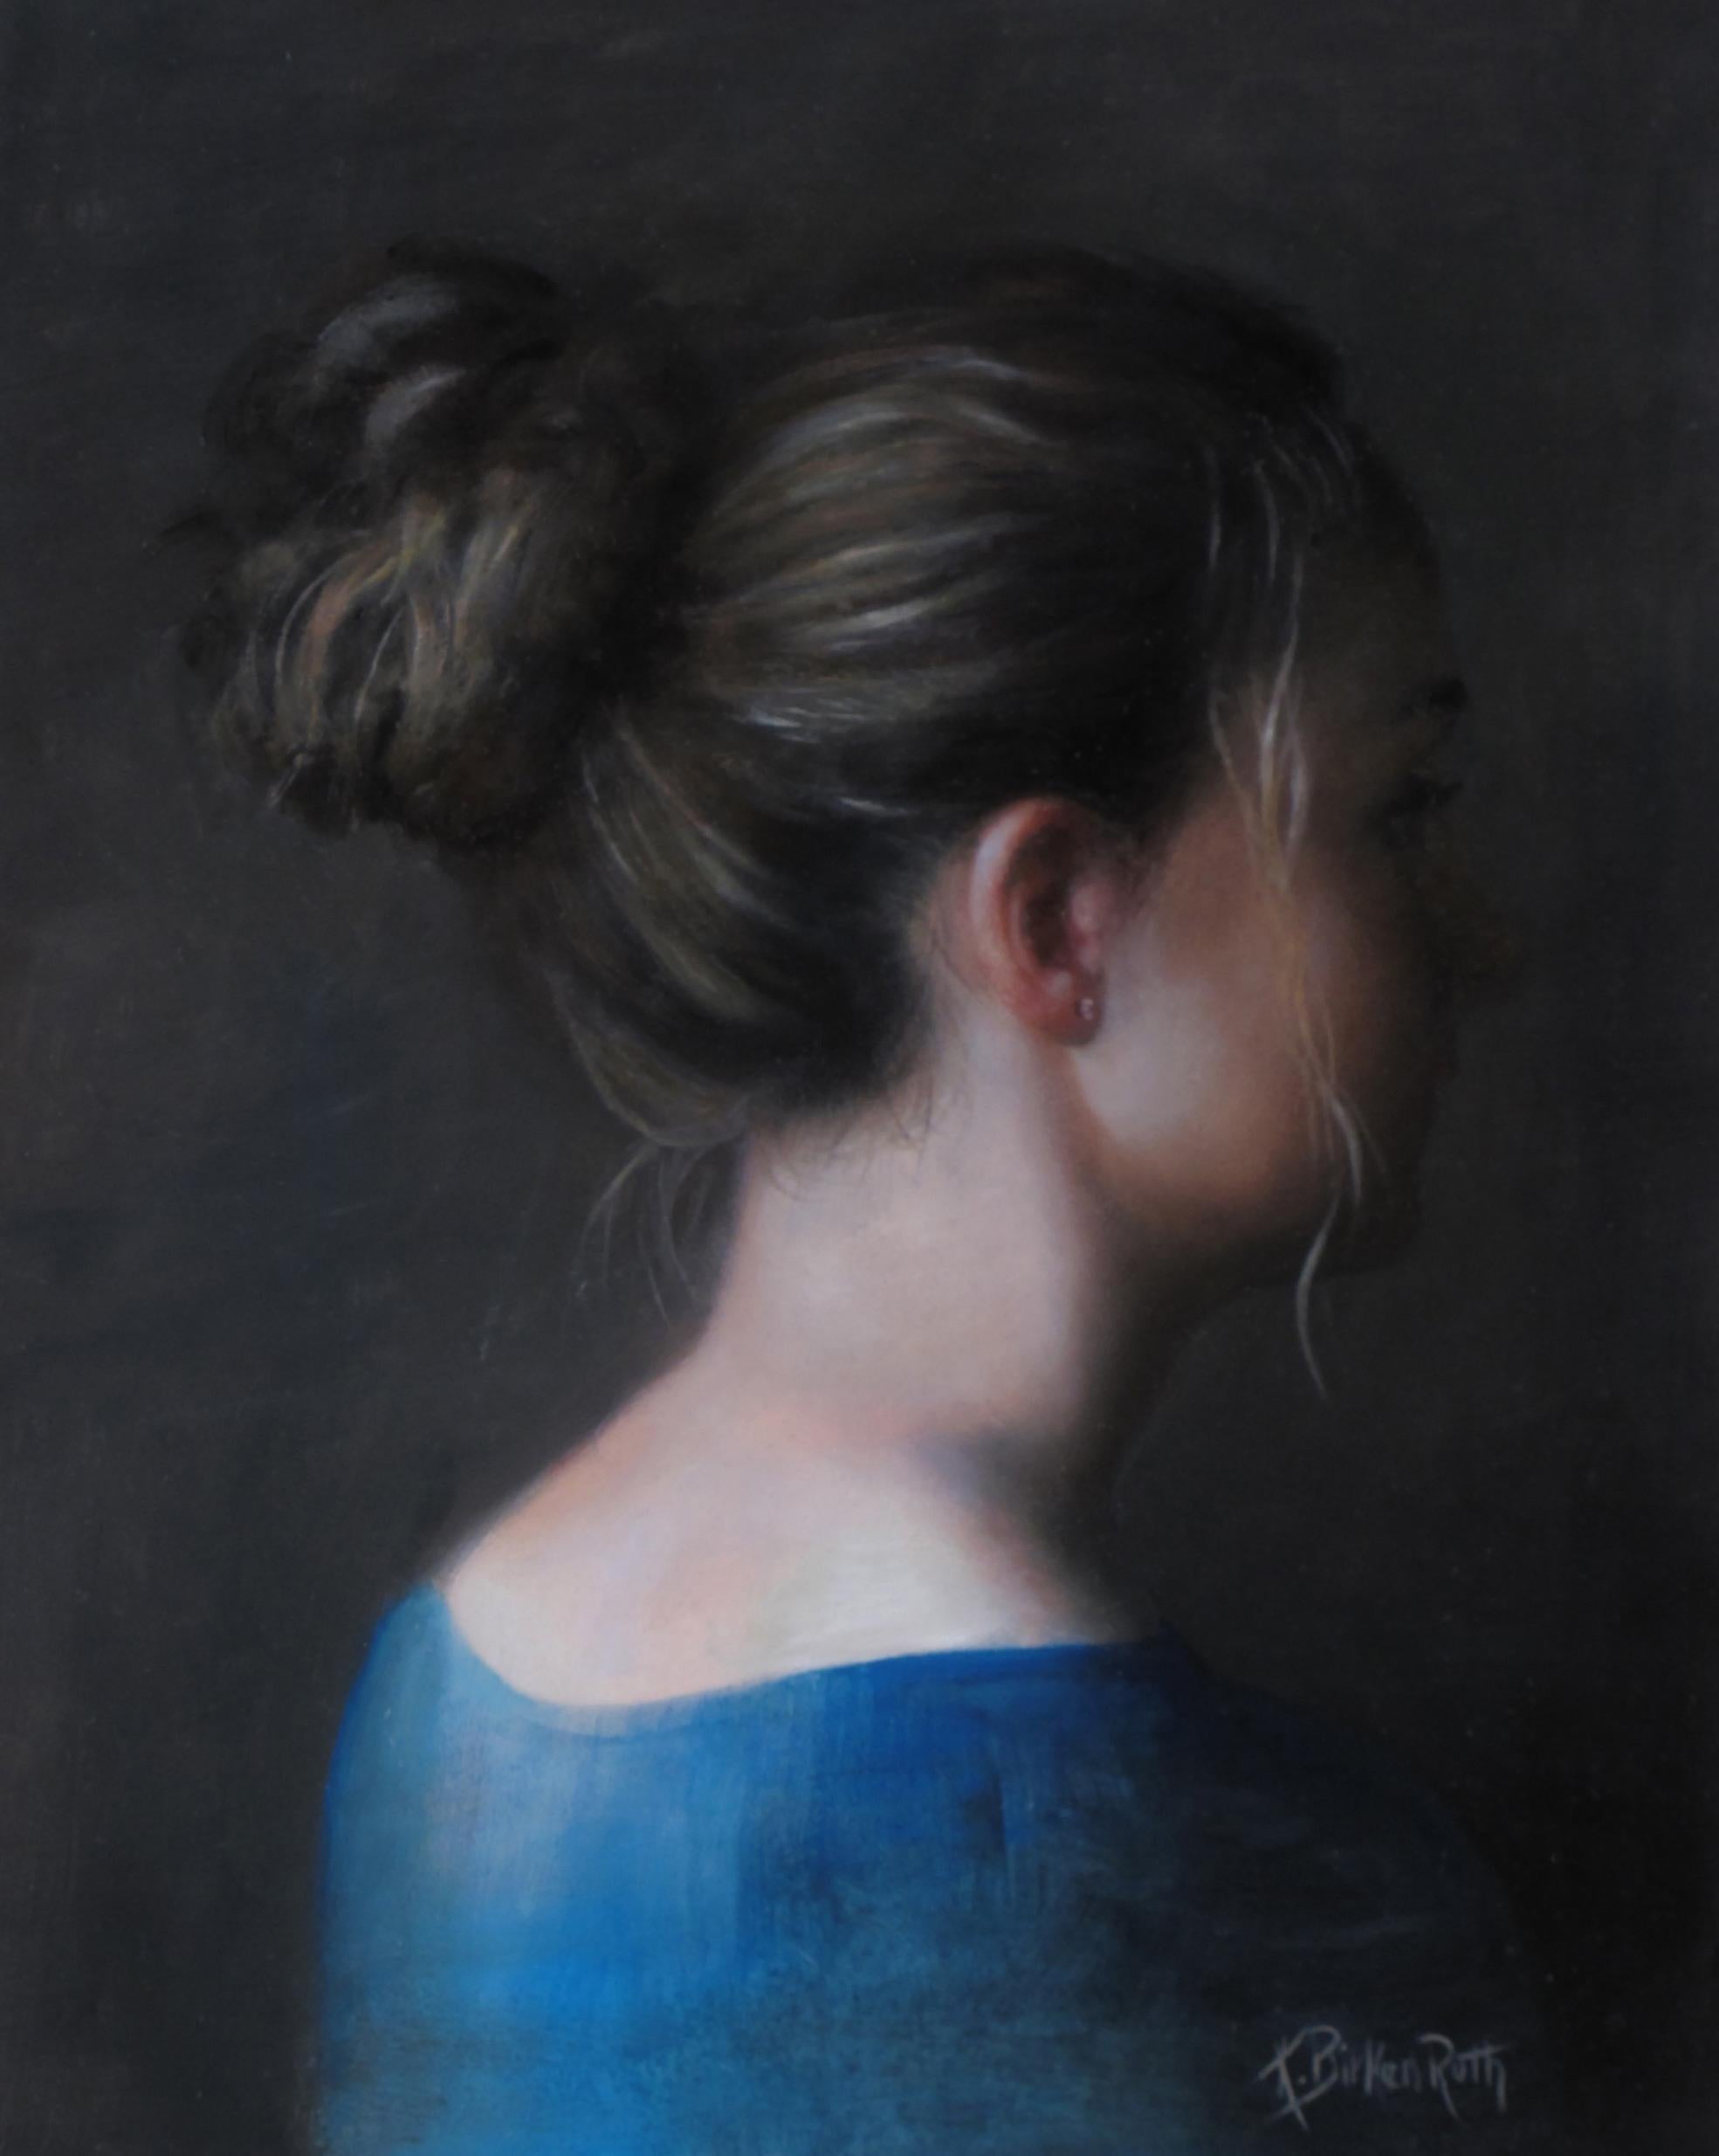 Kelly Birkenruth's "Portrait in Blue" (2021) is a captivating original oil painting on panel, measuring 10 x 8 x 2 inches. This exquisite piece showcases a delicate profile of a young woman with her hair elegantly styled in a bun, exuding timeless